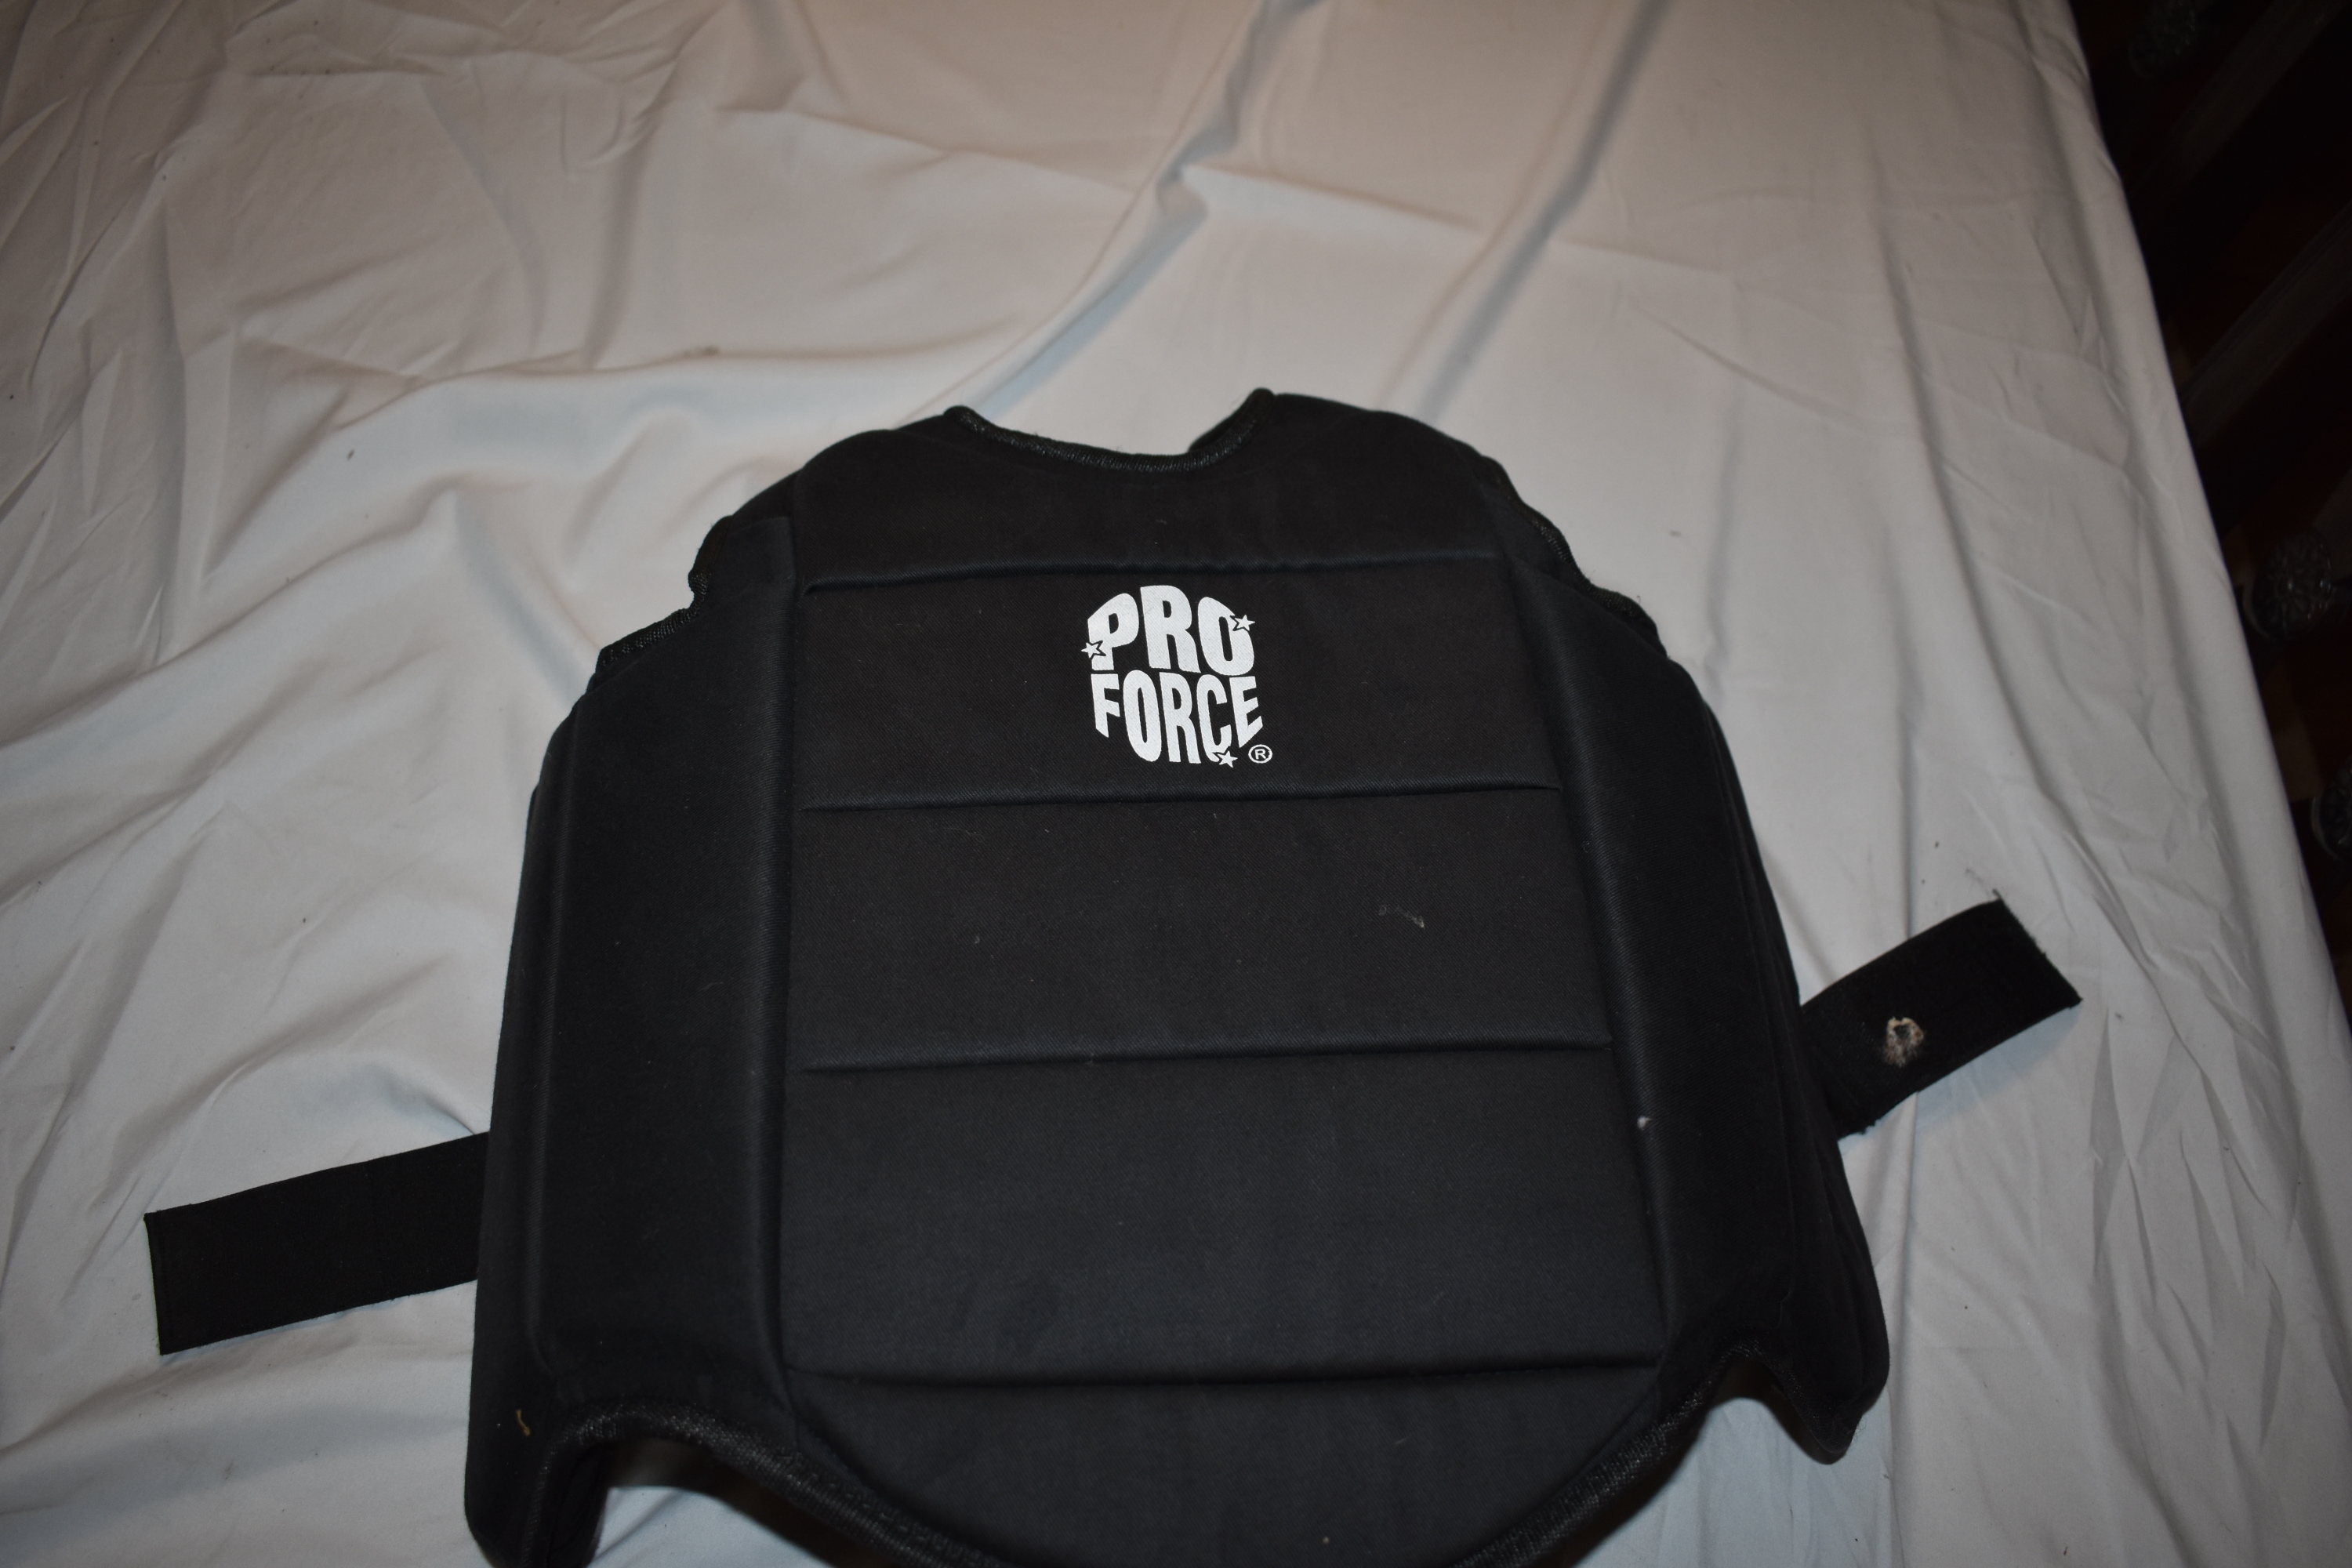 Pro Force Martial Arts Sparring Chest Protector, Black, Youth - Good Condition!